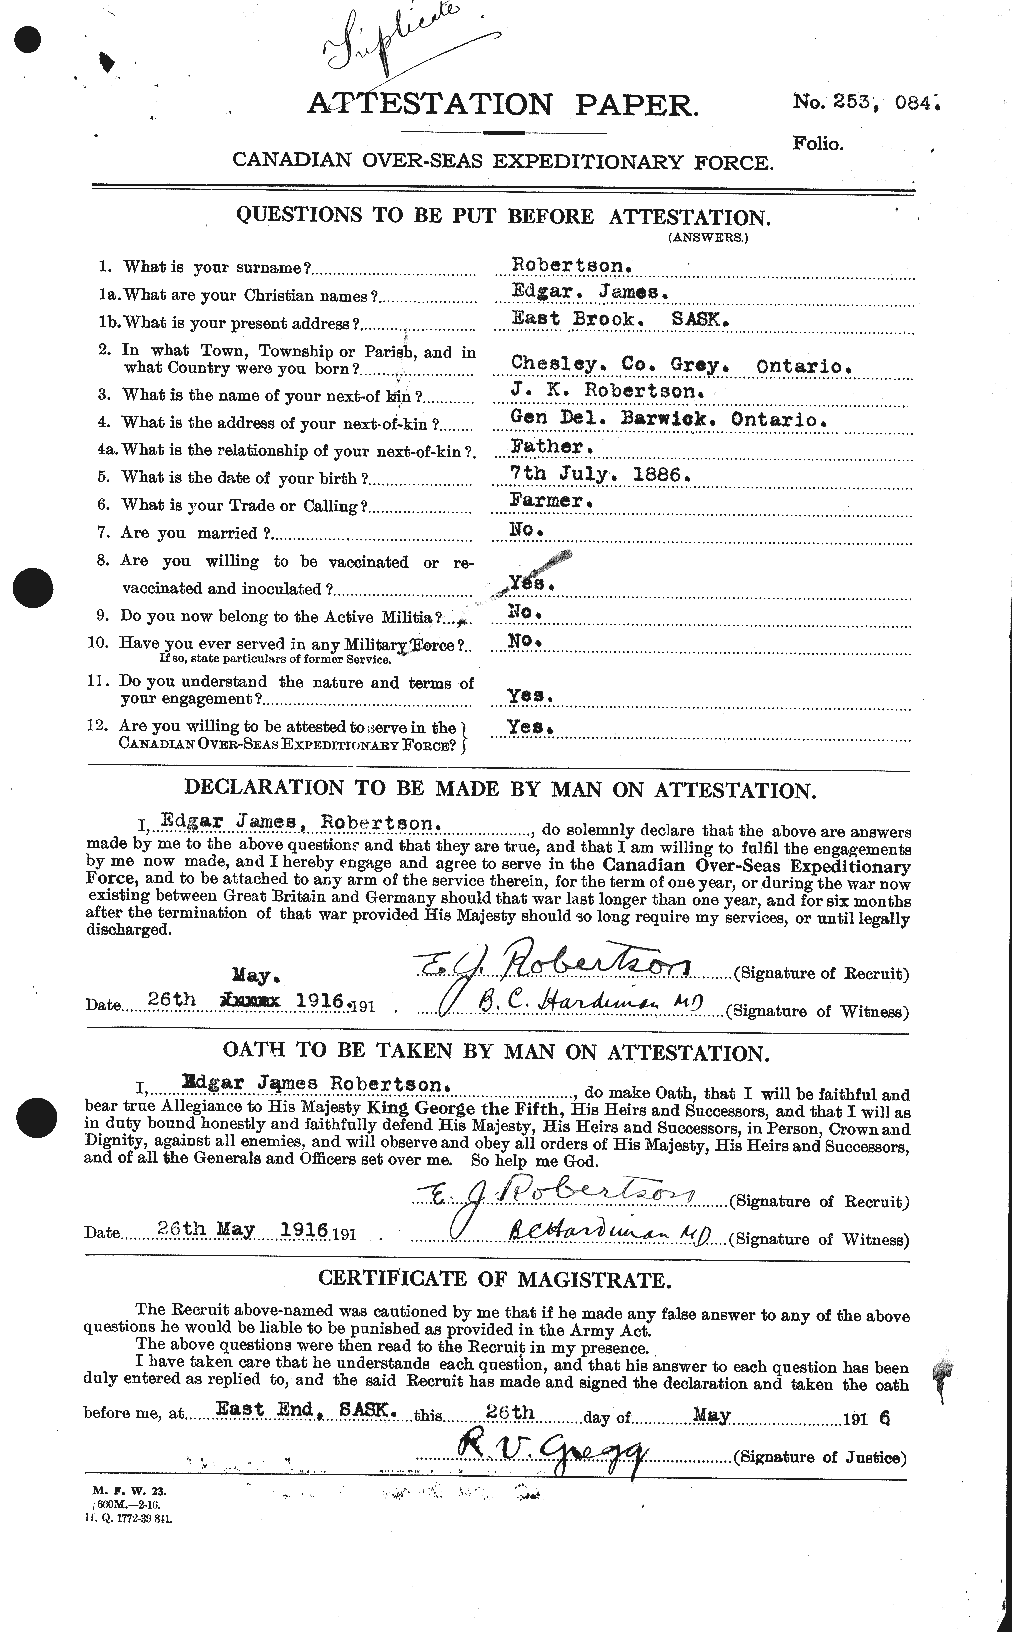 Personnel Records of the First World War - CEF 608898a